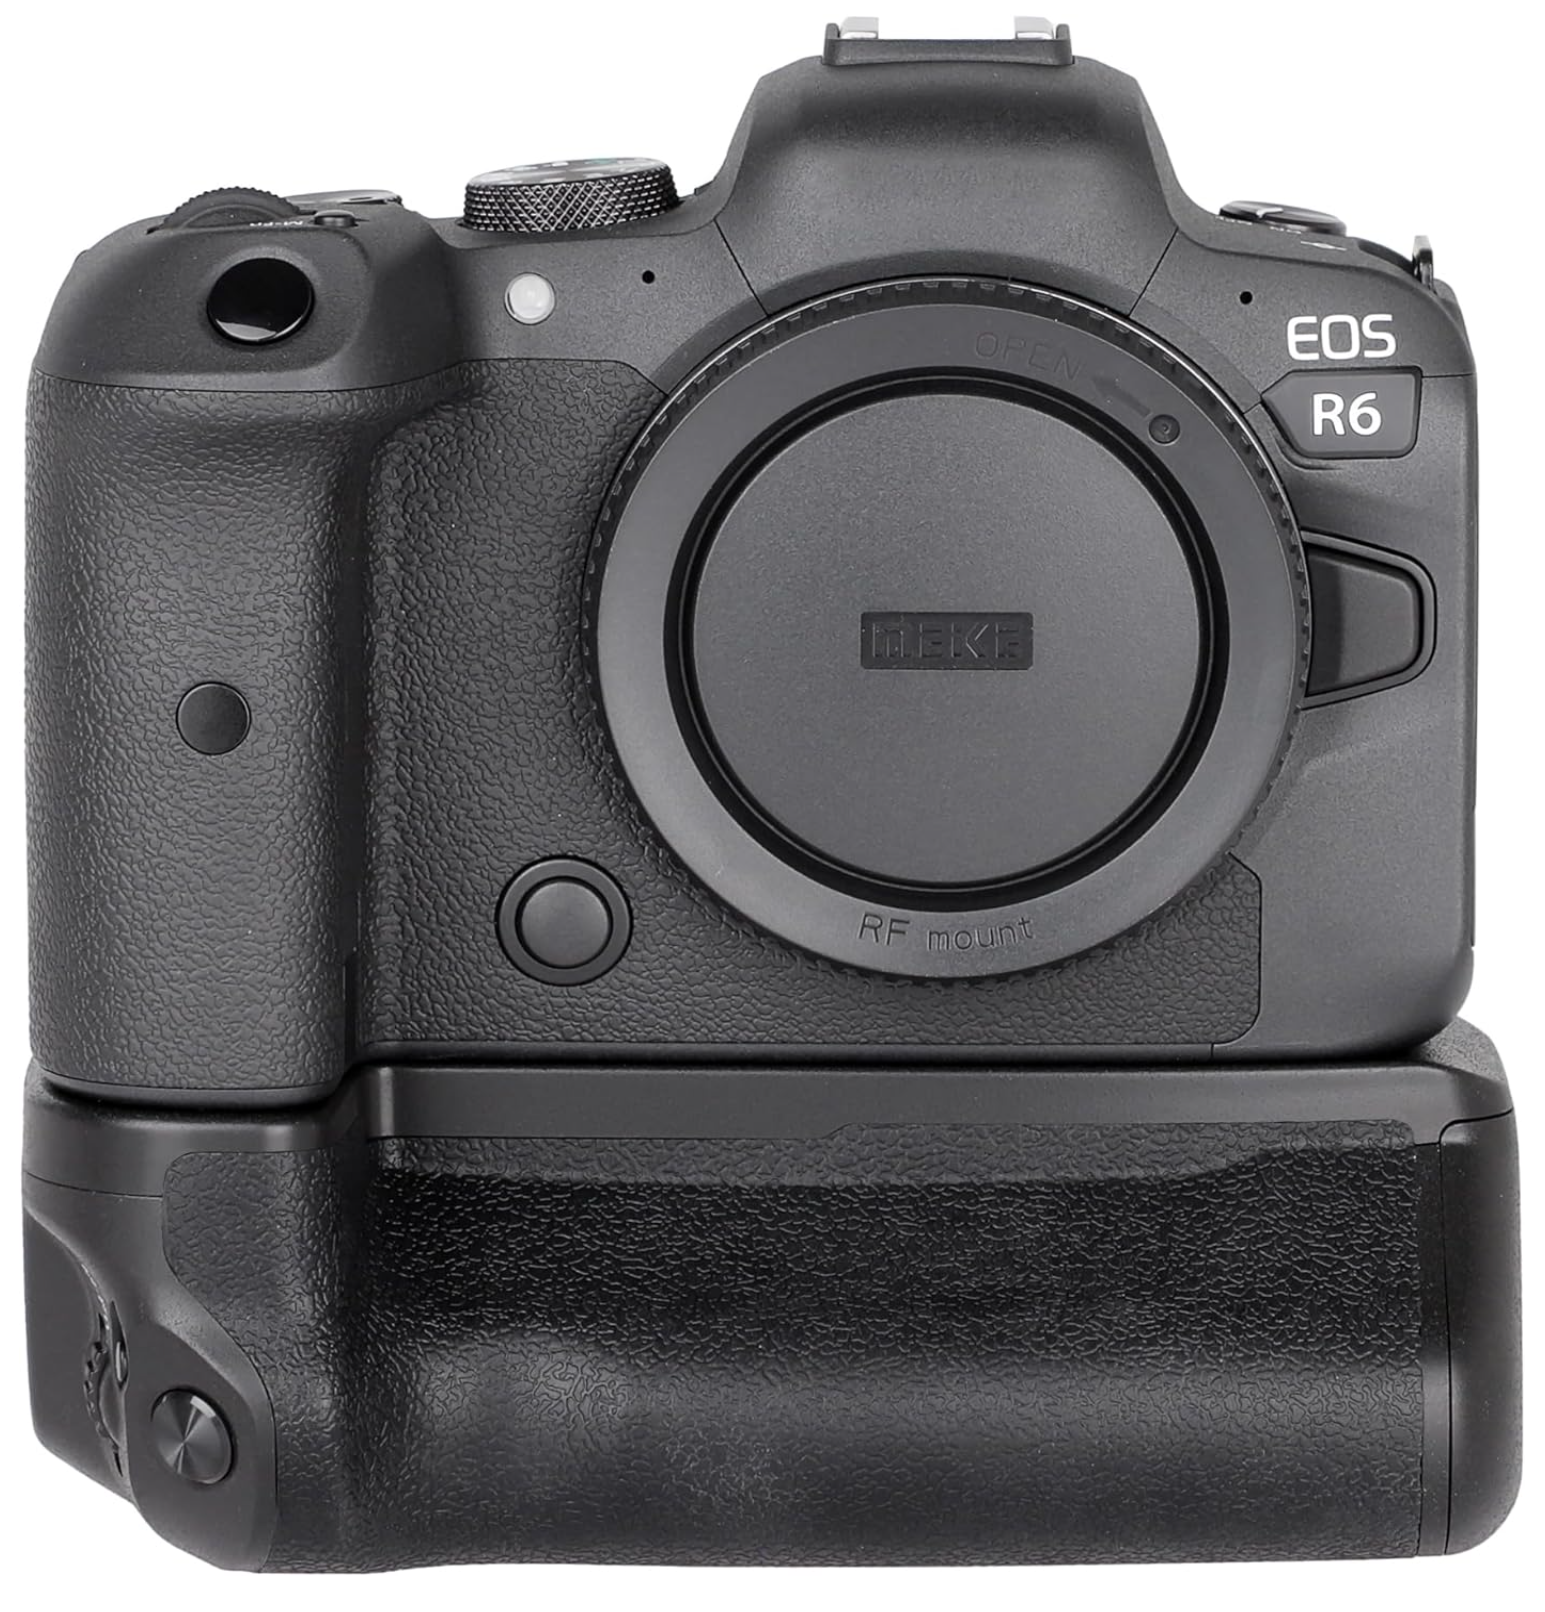 Battery Grip for EOS R6